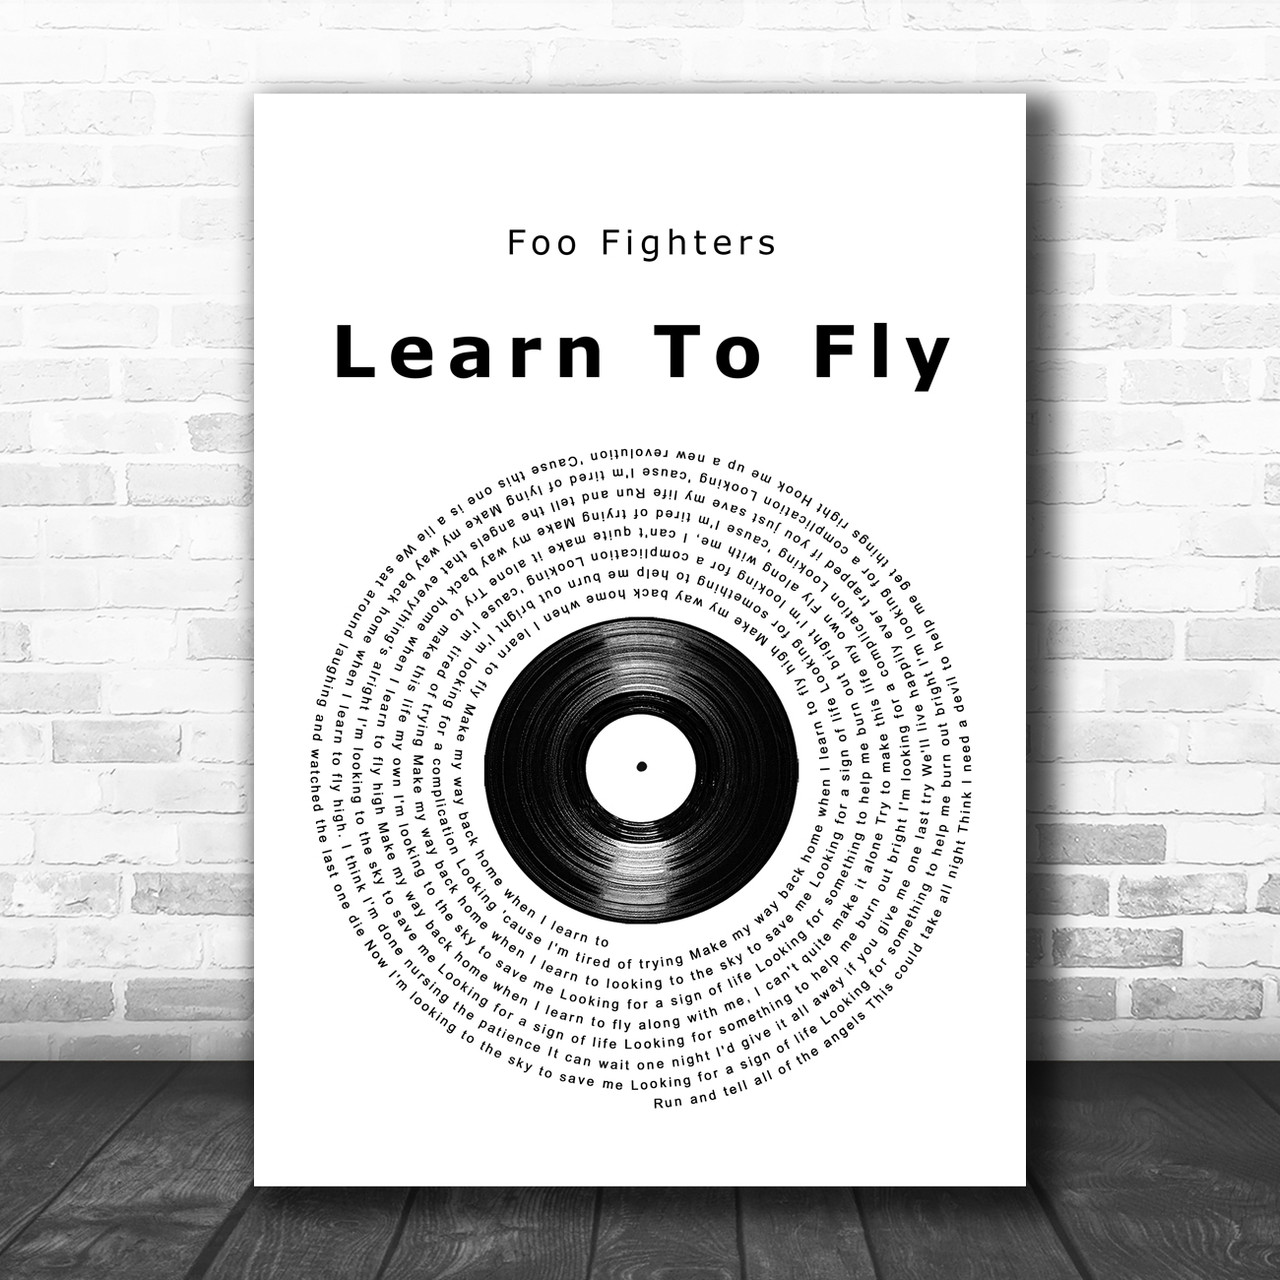 Pin by CONCLUSION on Music!  Foo fighters lyrics, Foo fighters poster, Foo  fighters